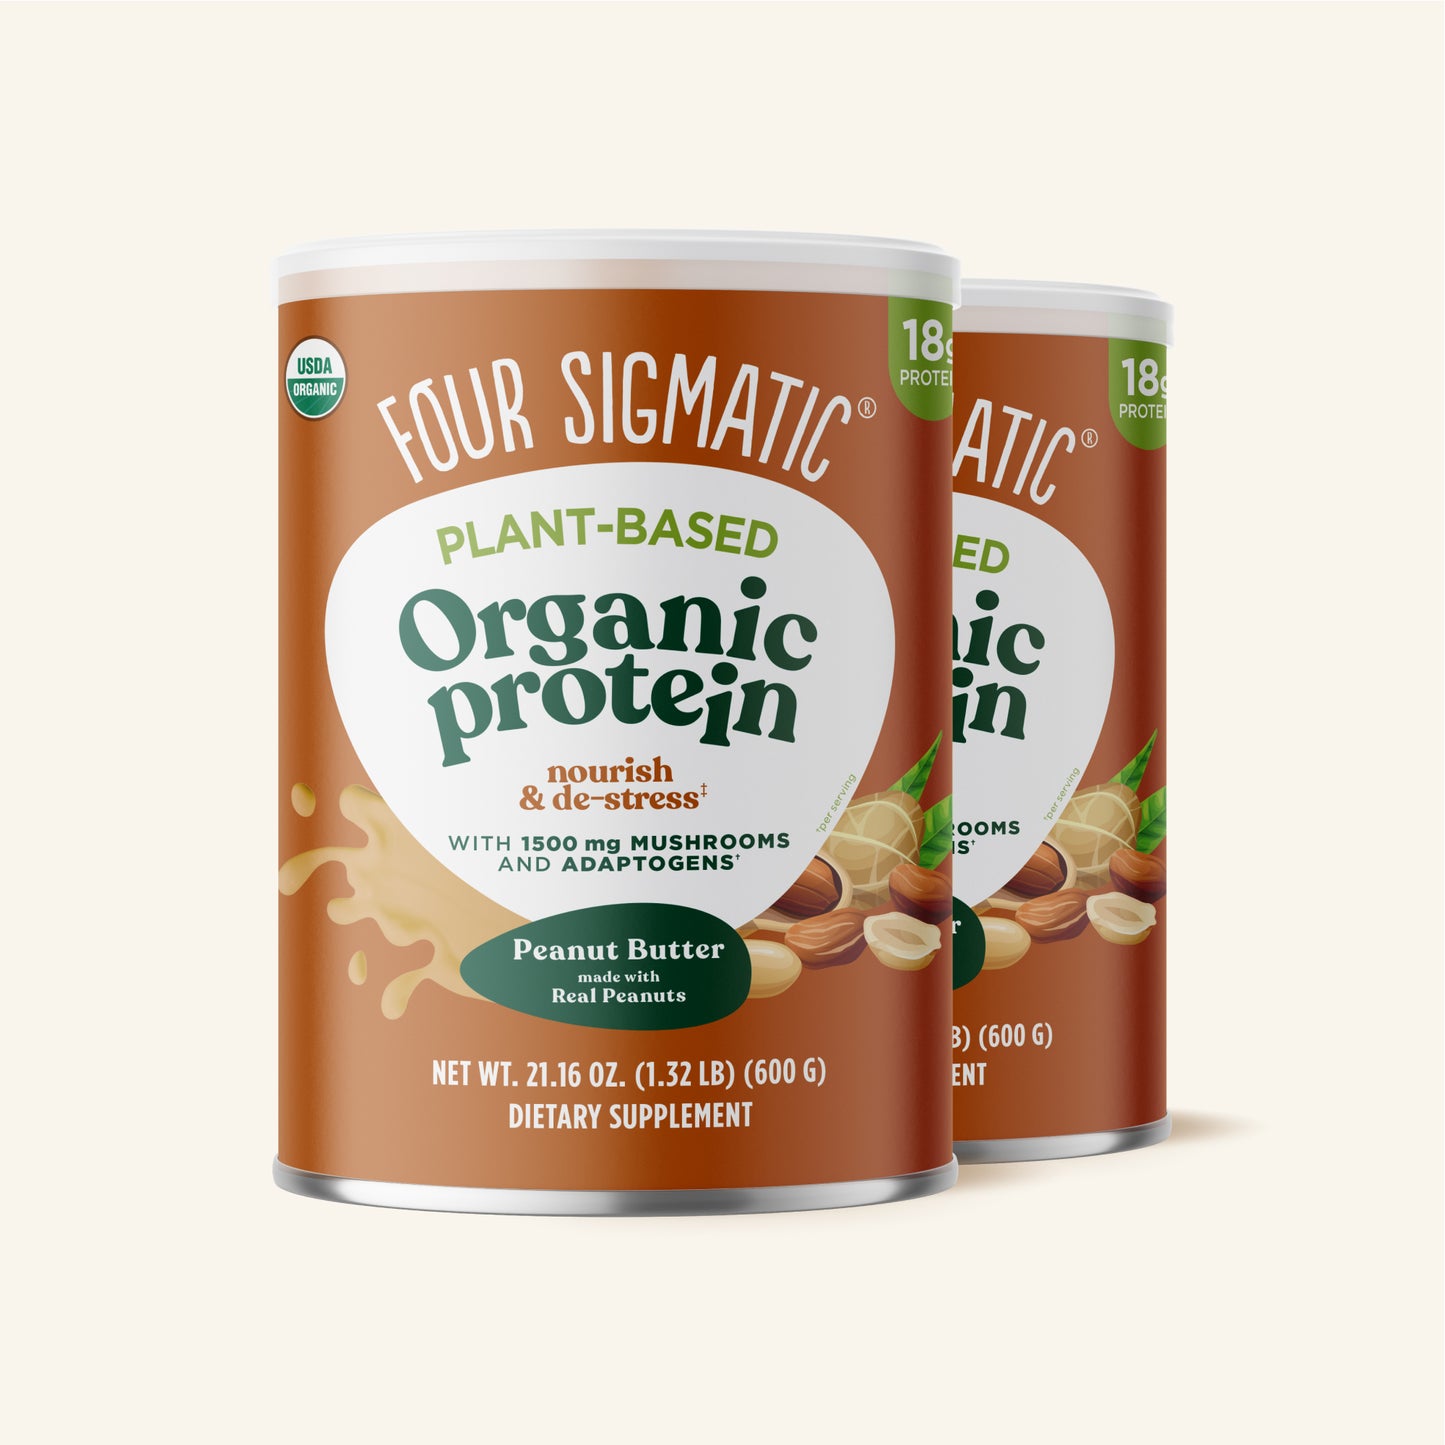 Peanut Butter Plant-based Protein